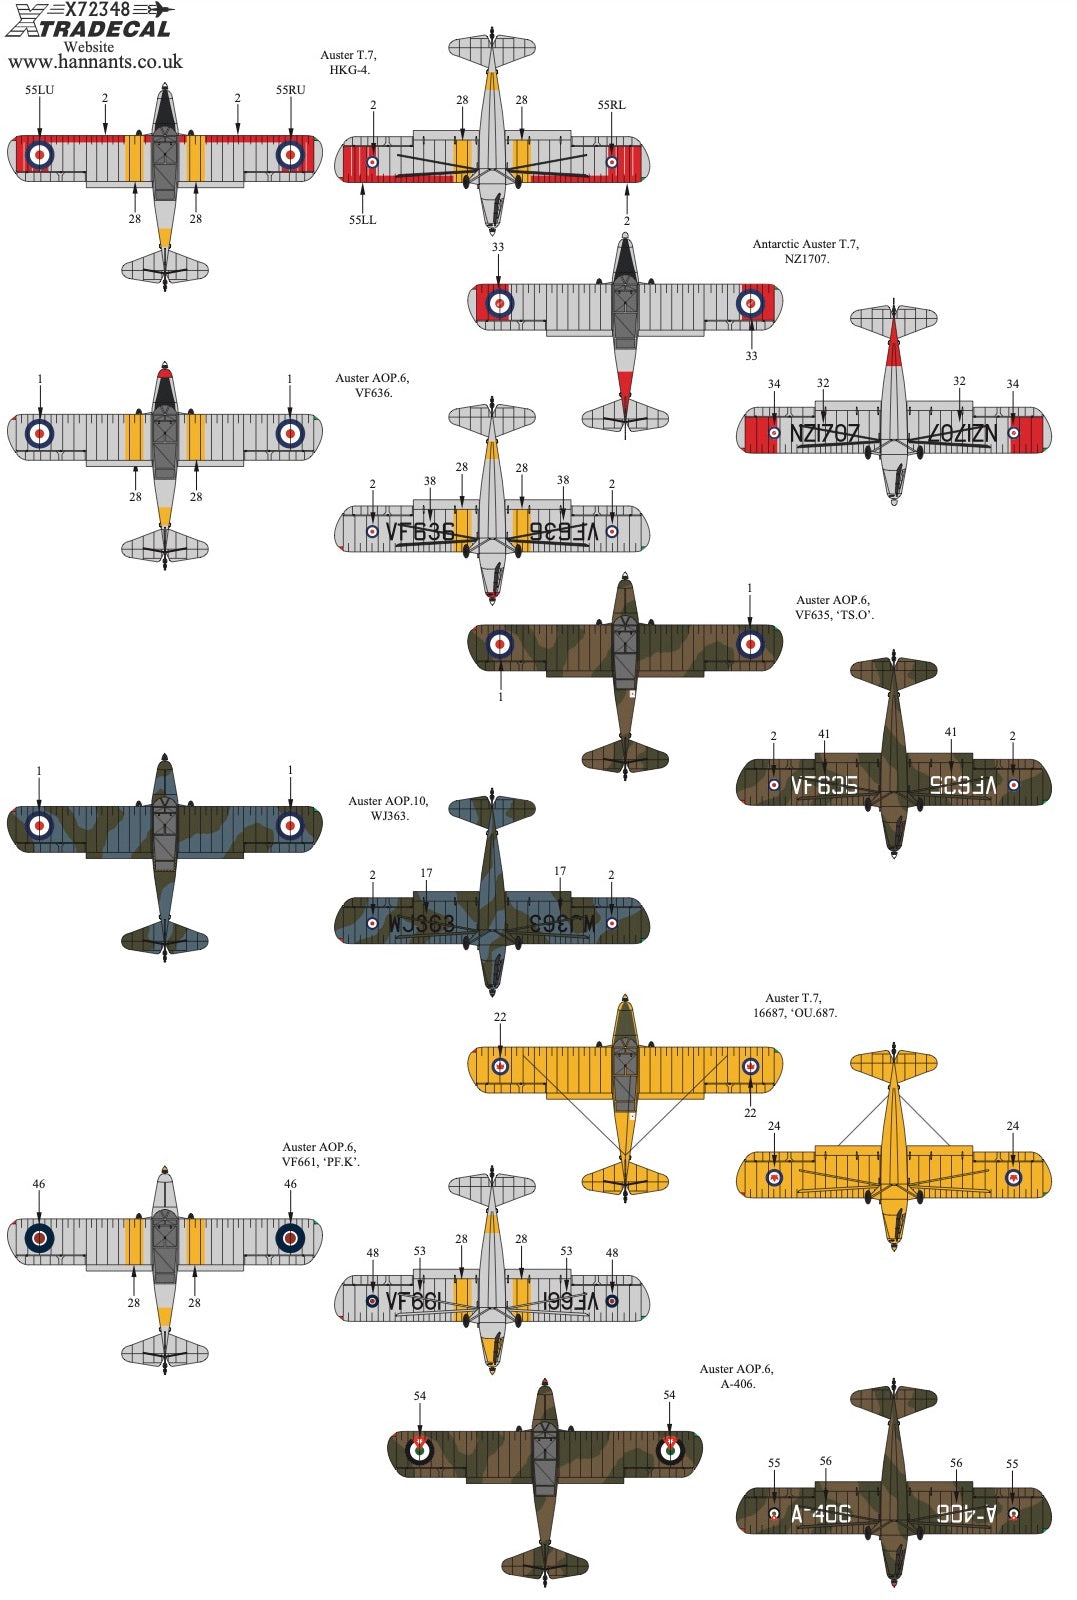 Xtradecal X72348 Auster In Worldwide Service Collection 1/72